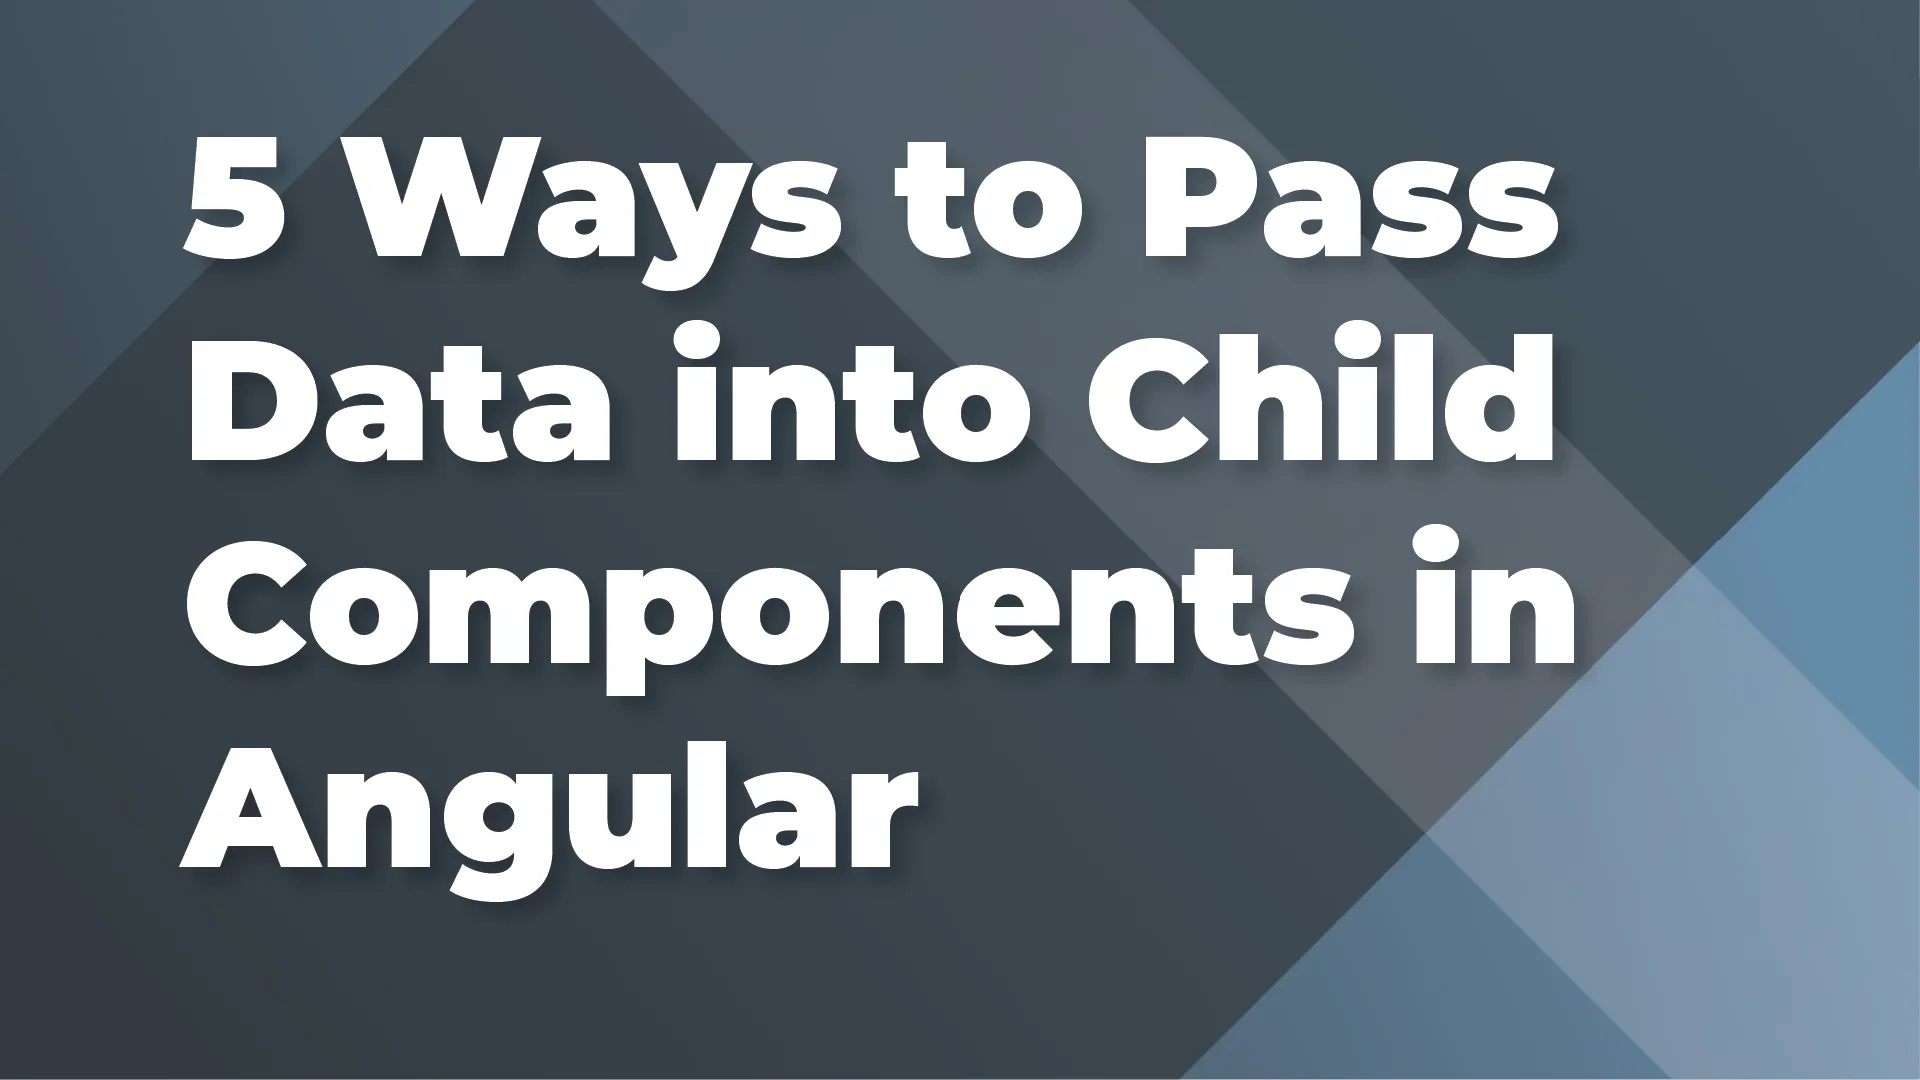 5 Ways to Pass Data into Child Components in Angular